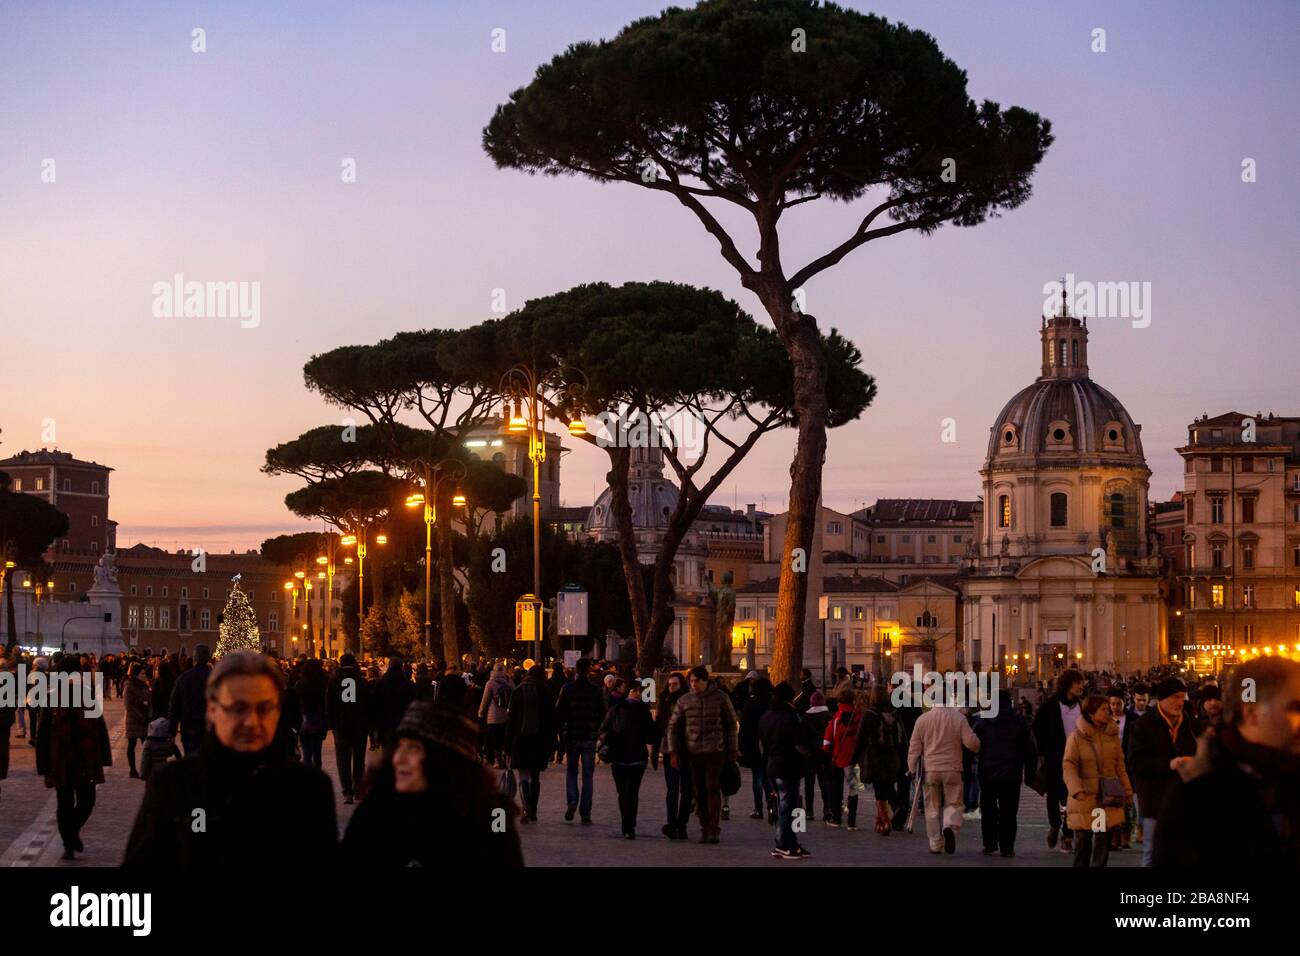 Tourists visiting sights in Rome at night Stock Photo